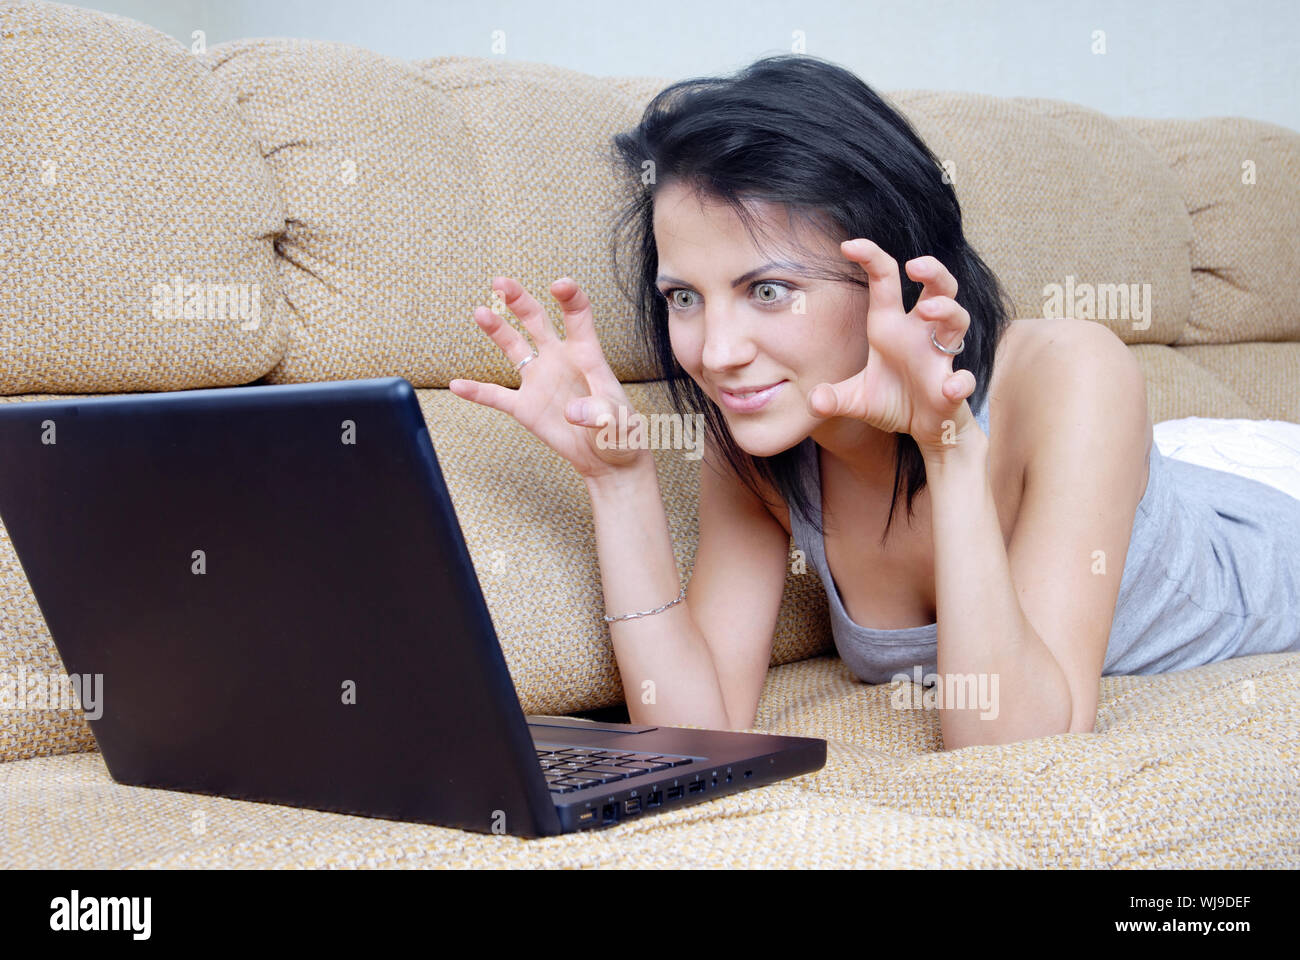 Playful woman laying on a sofe and using wireless laptop Stock Photo